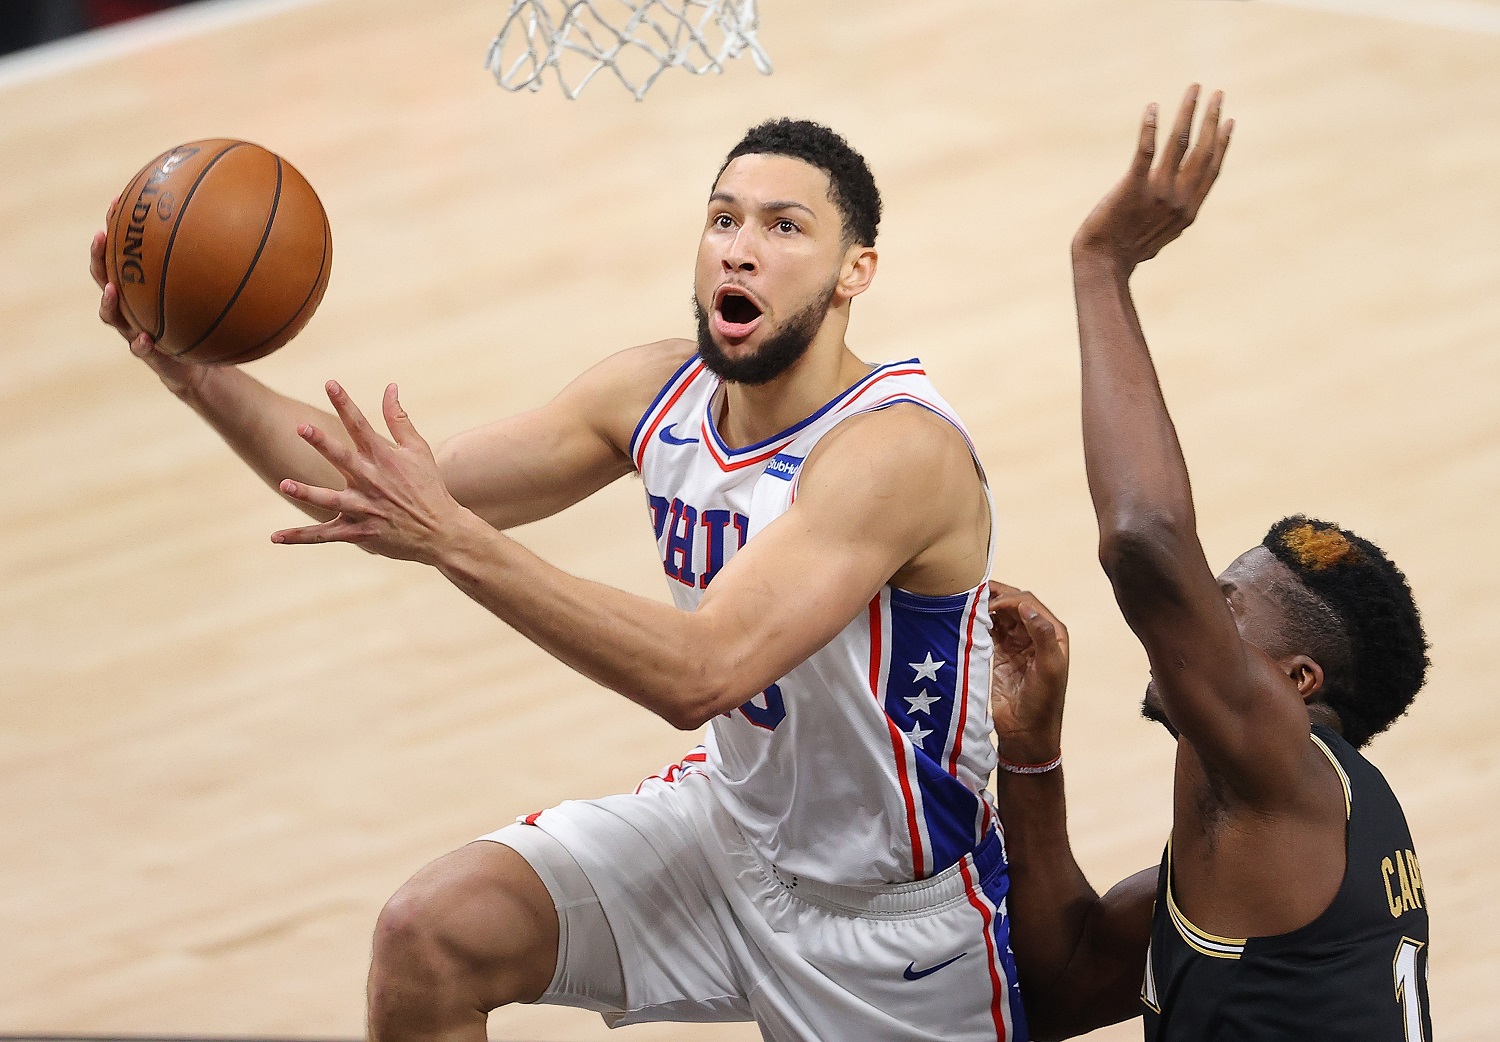 Ben Simmons of the Philadelphia 76ers drives against Clint Capela of the Atlanta Hawks during Game 4 of the Eastern Conference semifinals.